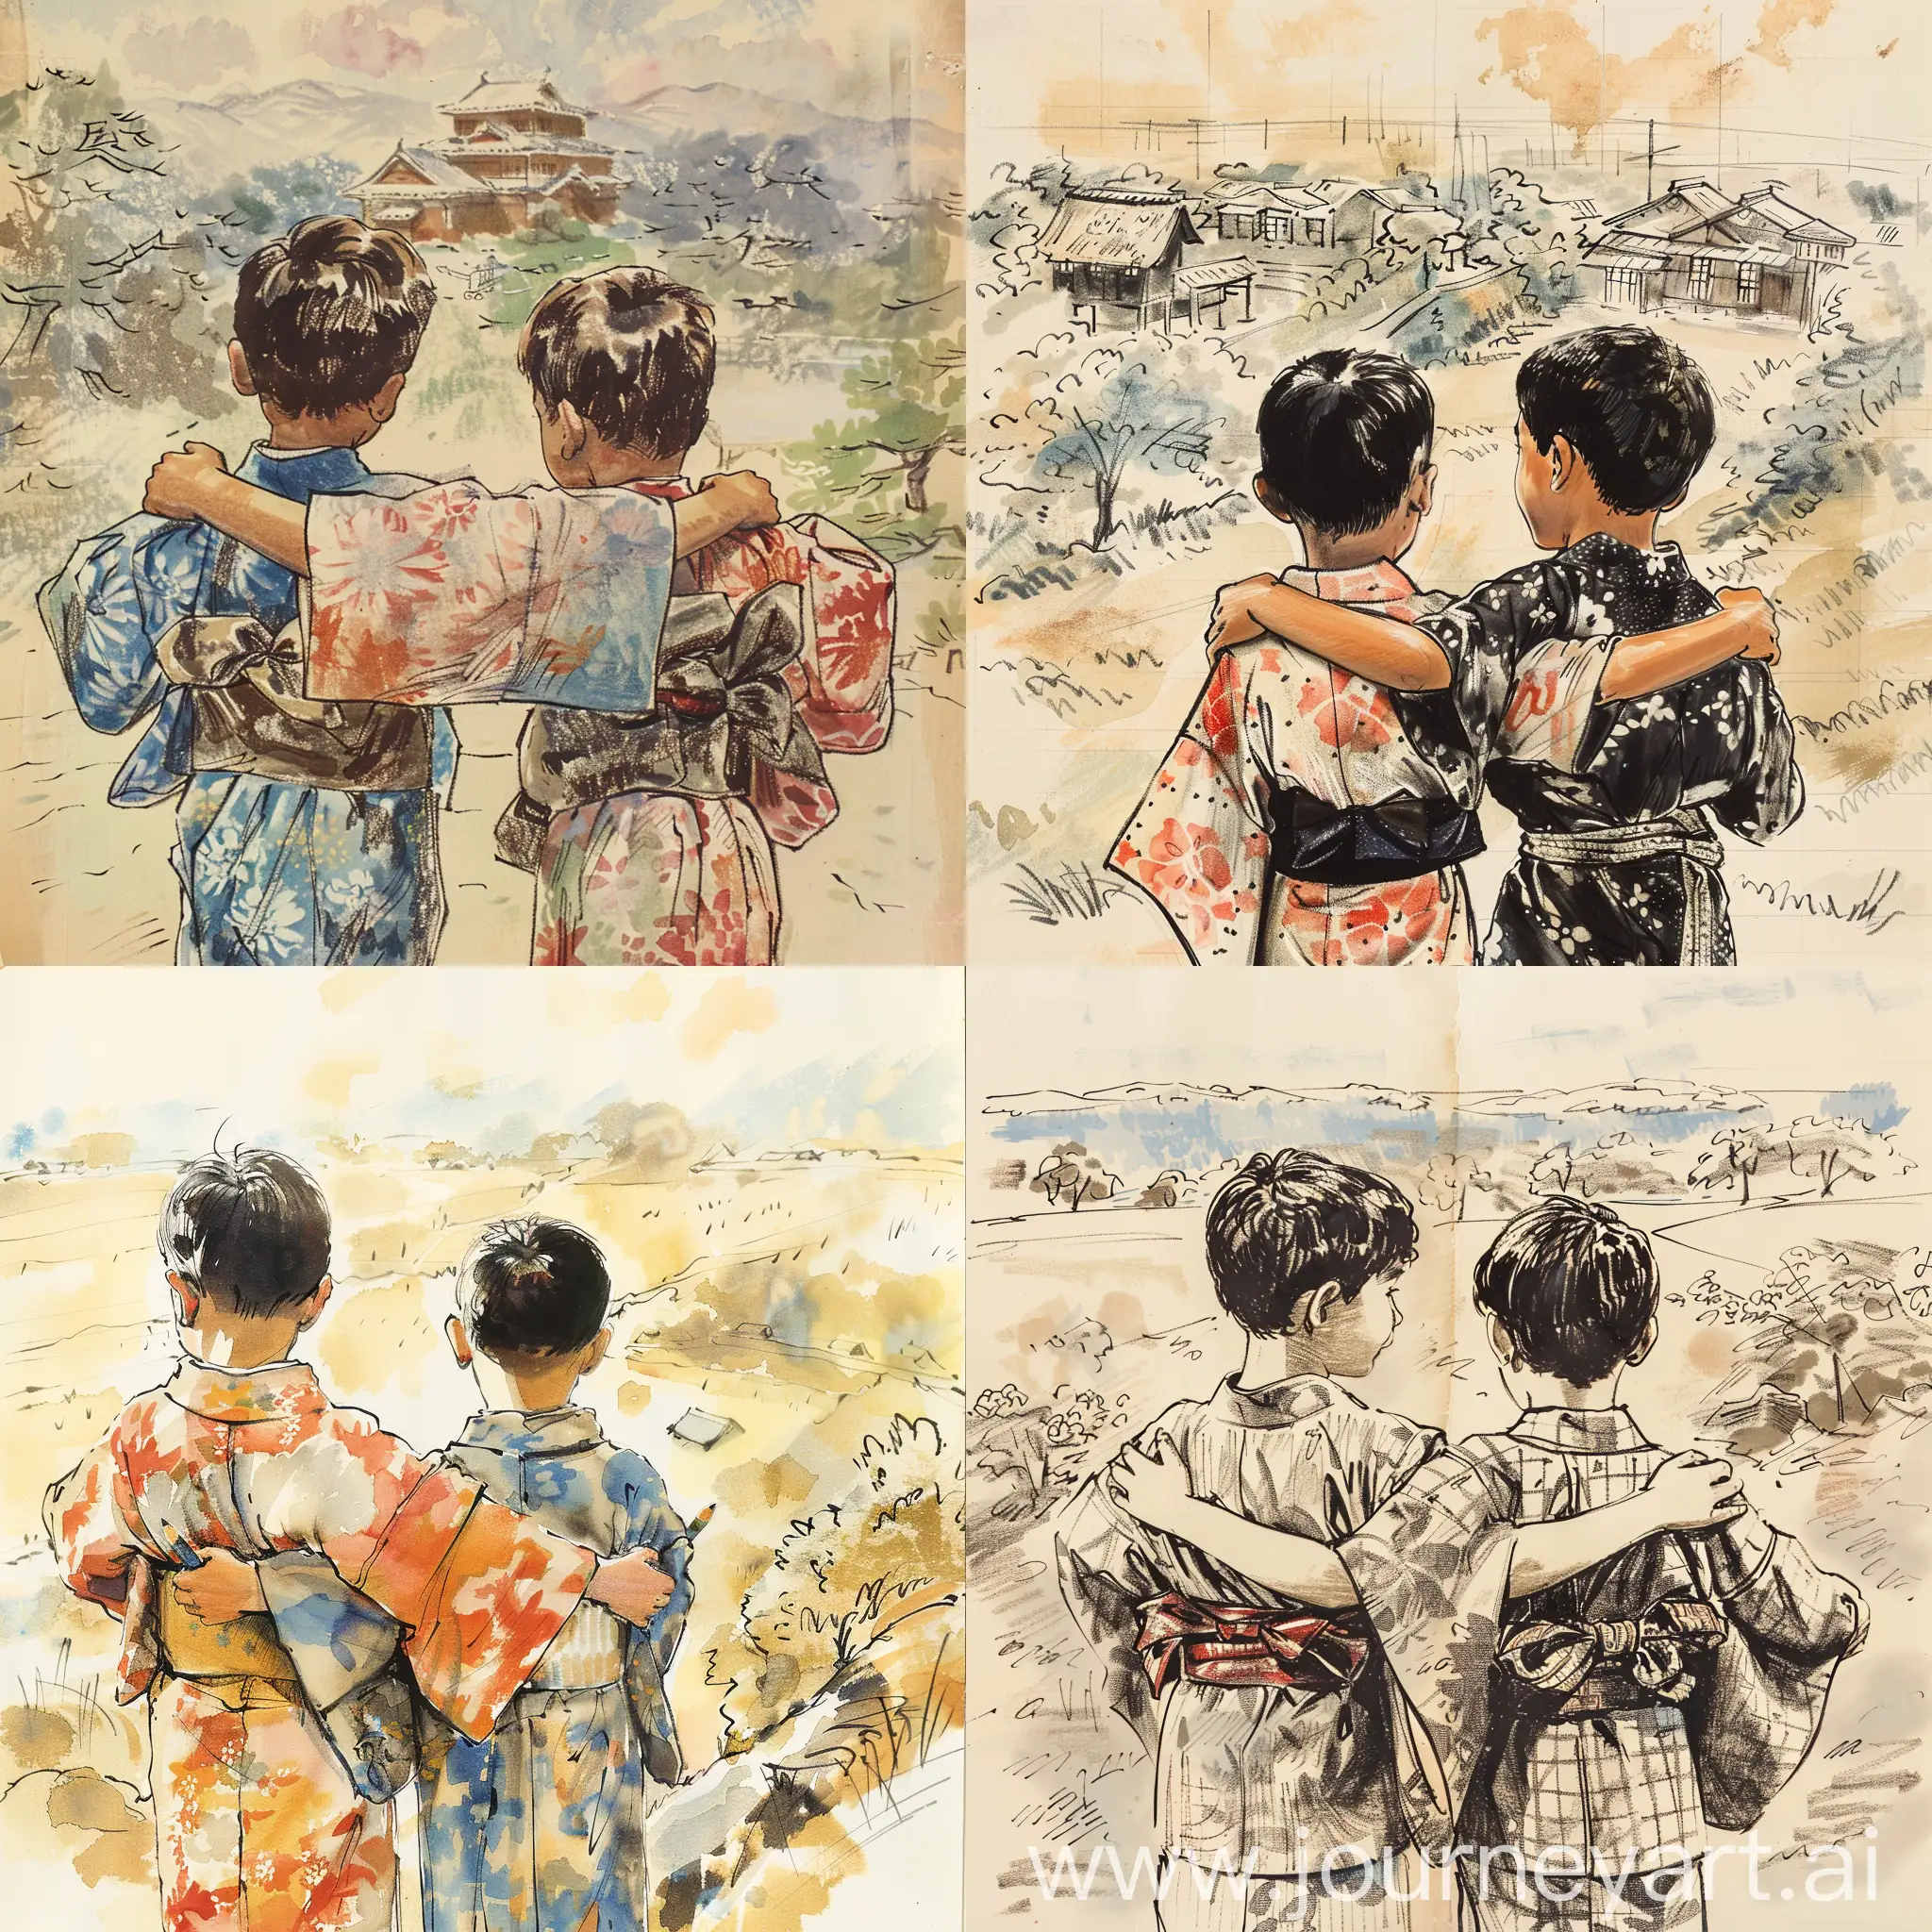 Two boys in kimonos Japanese children look back with their arms around each other's shoulders. Illustrated story Japan has a rich tradition of storytelling and whimsical illustrations. Create a collaborative story that incorporates elements of these artistic styles. A turbulent past and the tenacious spirit of the Japanese people. A patriotic Japan in a DVD still from the 1930 film directed by Shunso Hishida. preschool kids drawing, naive and unstrained touch of crayons scribbled, hand drawn, single lines scrawled blur of landscape Japanese countryside in the background.